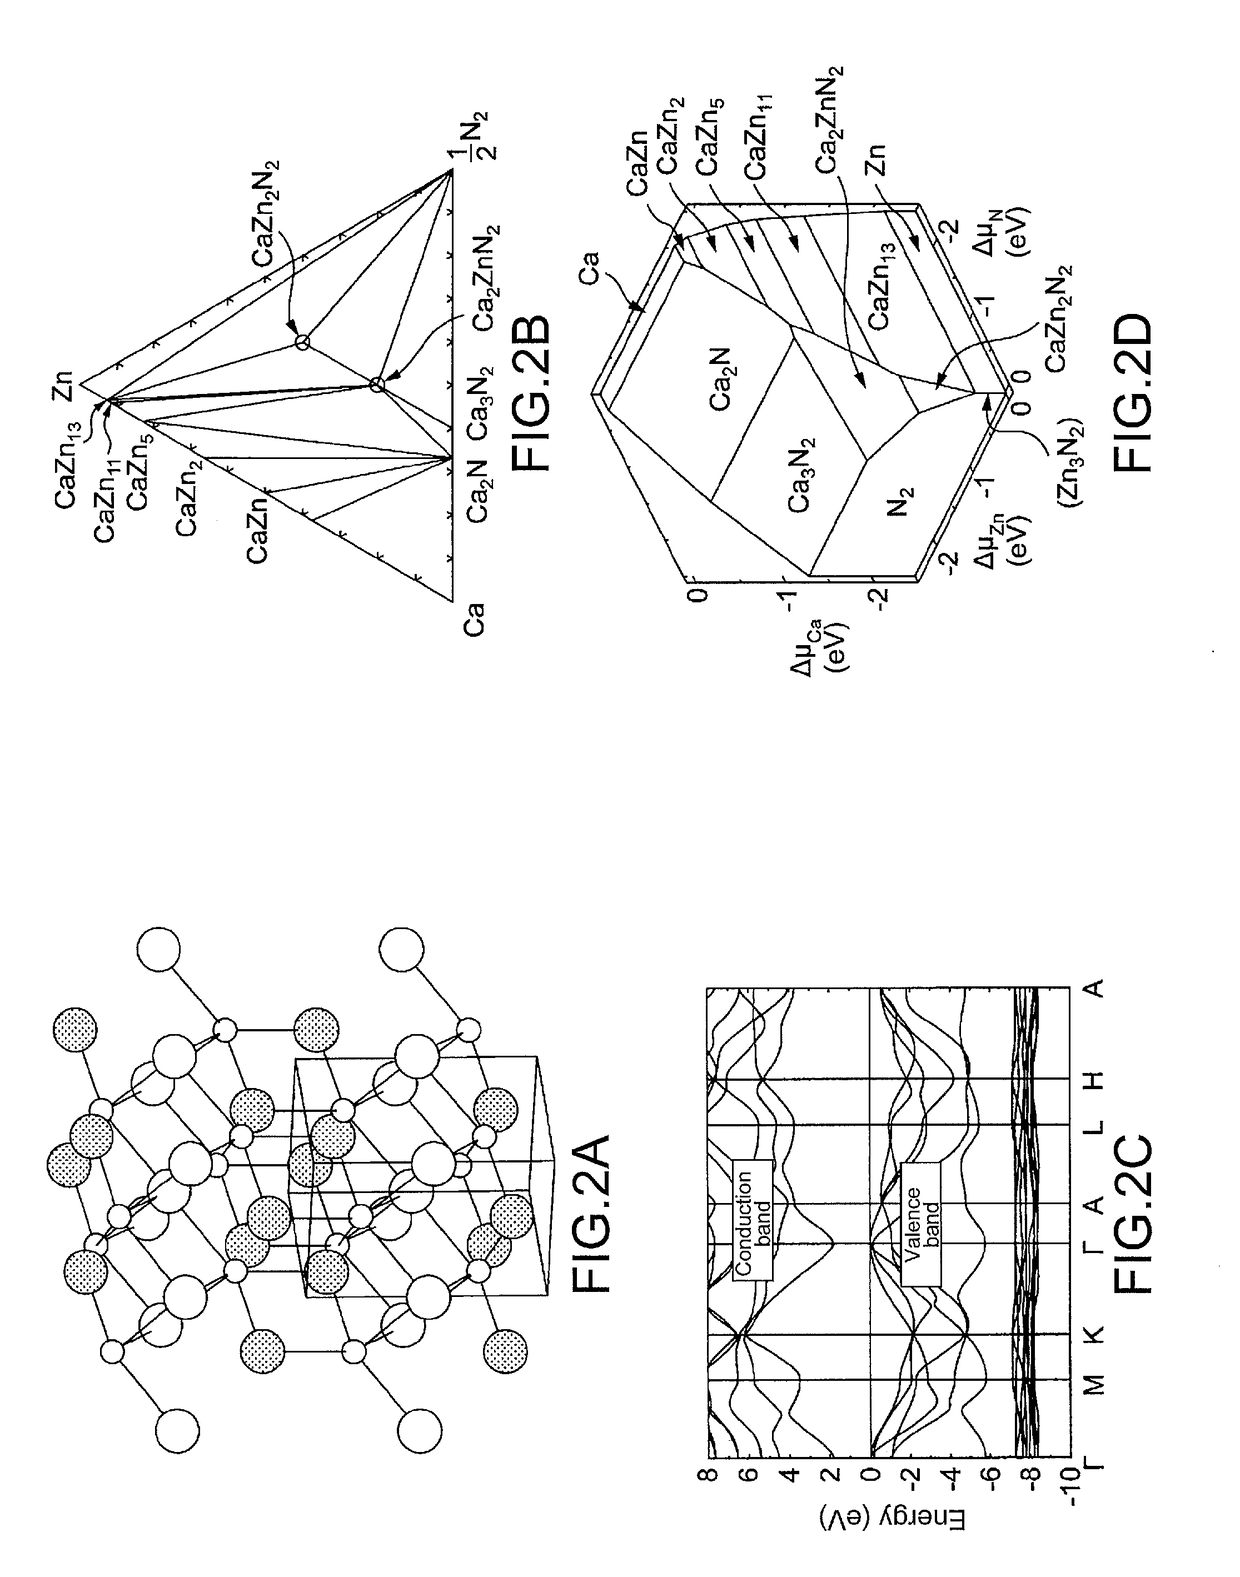 Zinc nitride compound and method for producing same